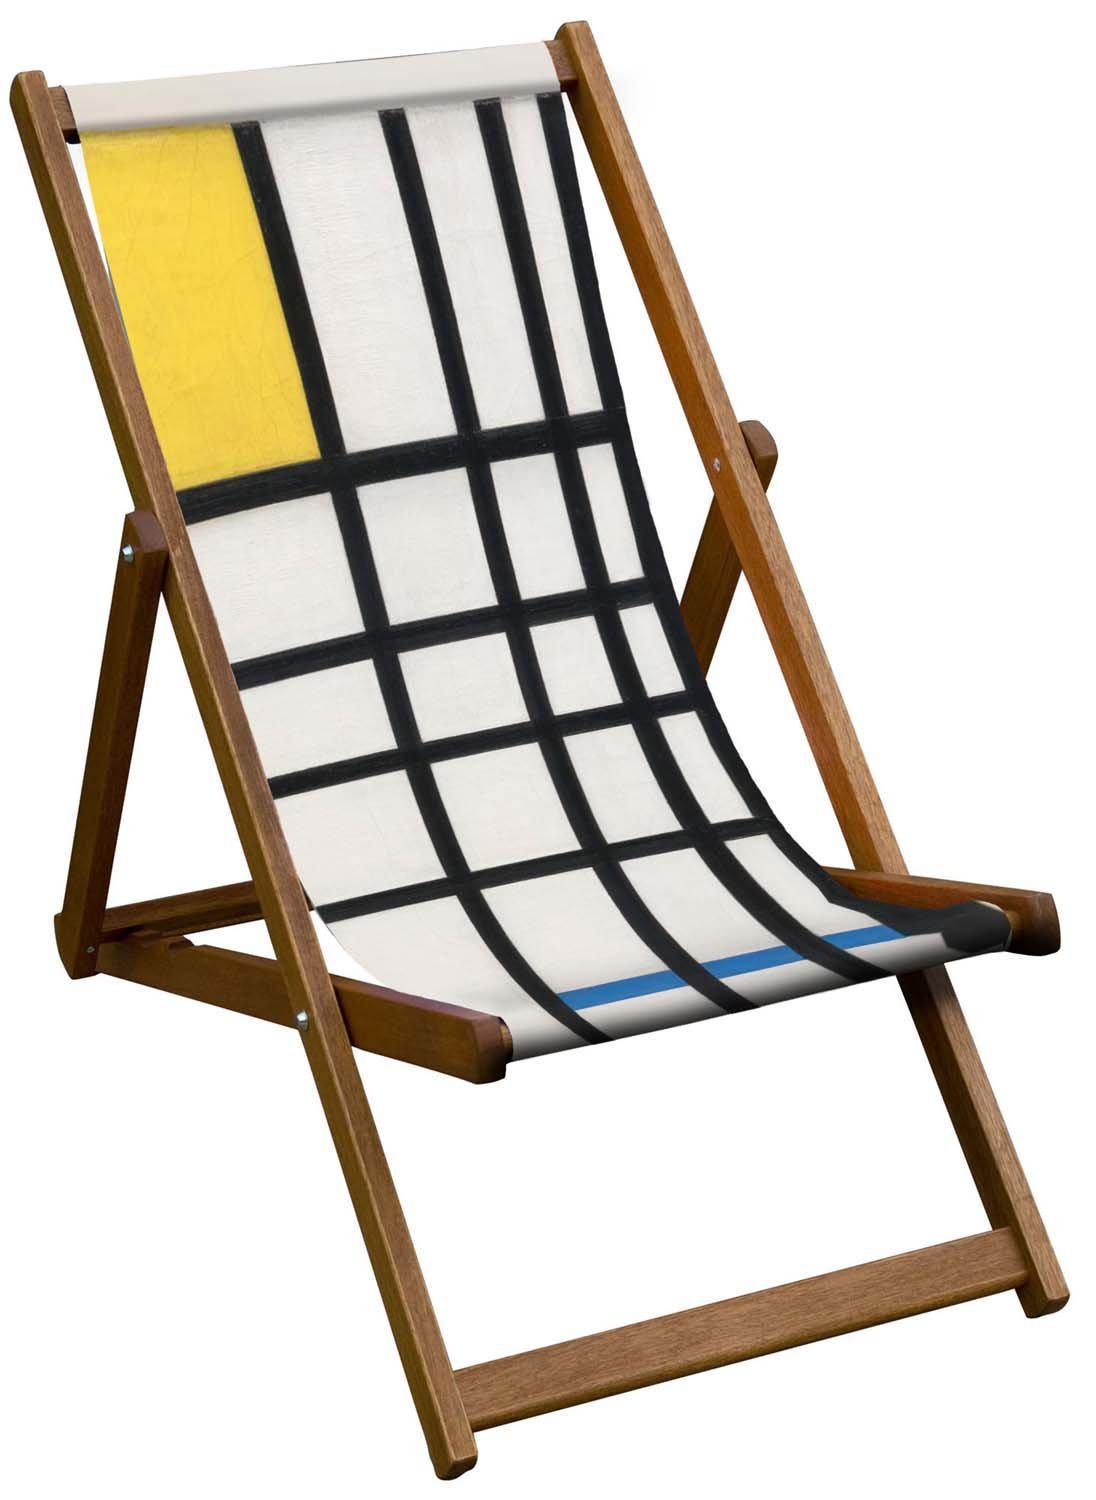 Composition with Yellow, Blue and Red - TATE - Piet Mondrian Deckchair